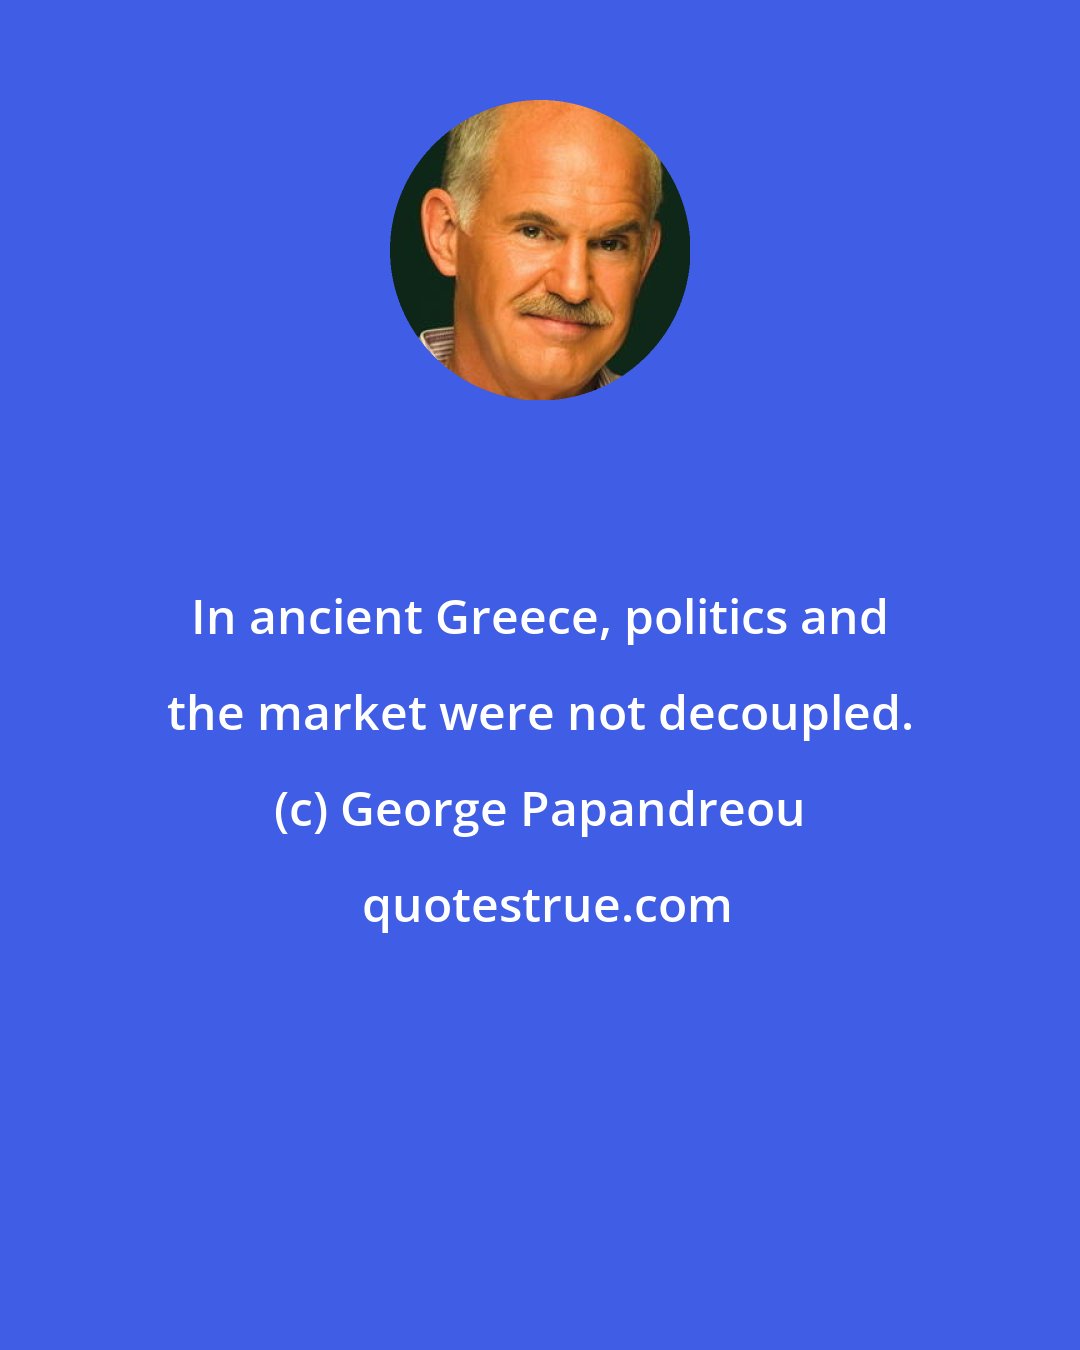 George Papandreou: In ancient Greece, politics and the market were not decoupled.